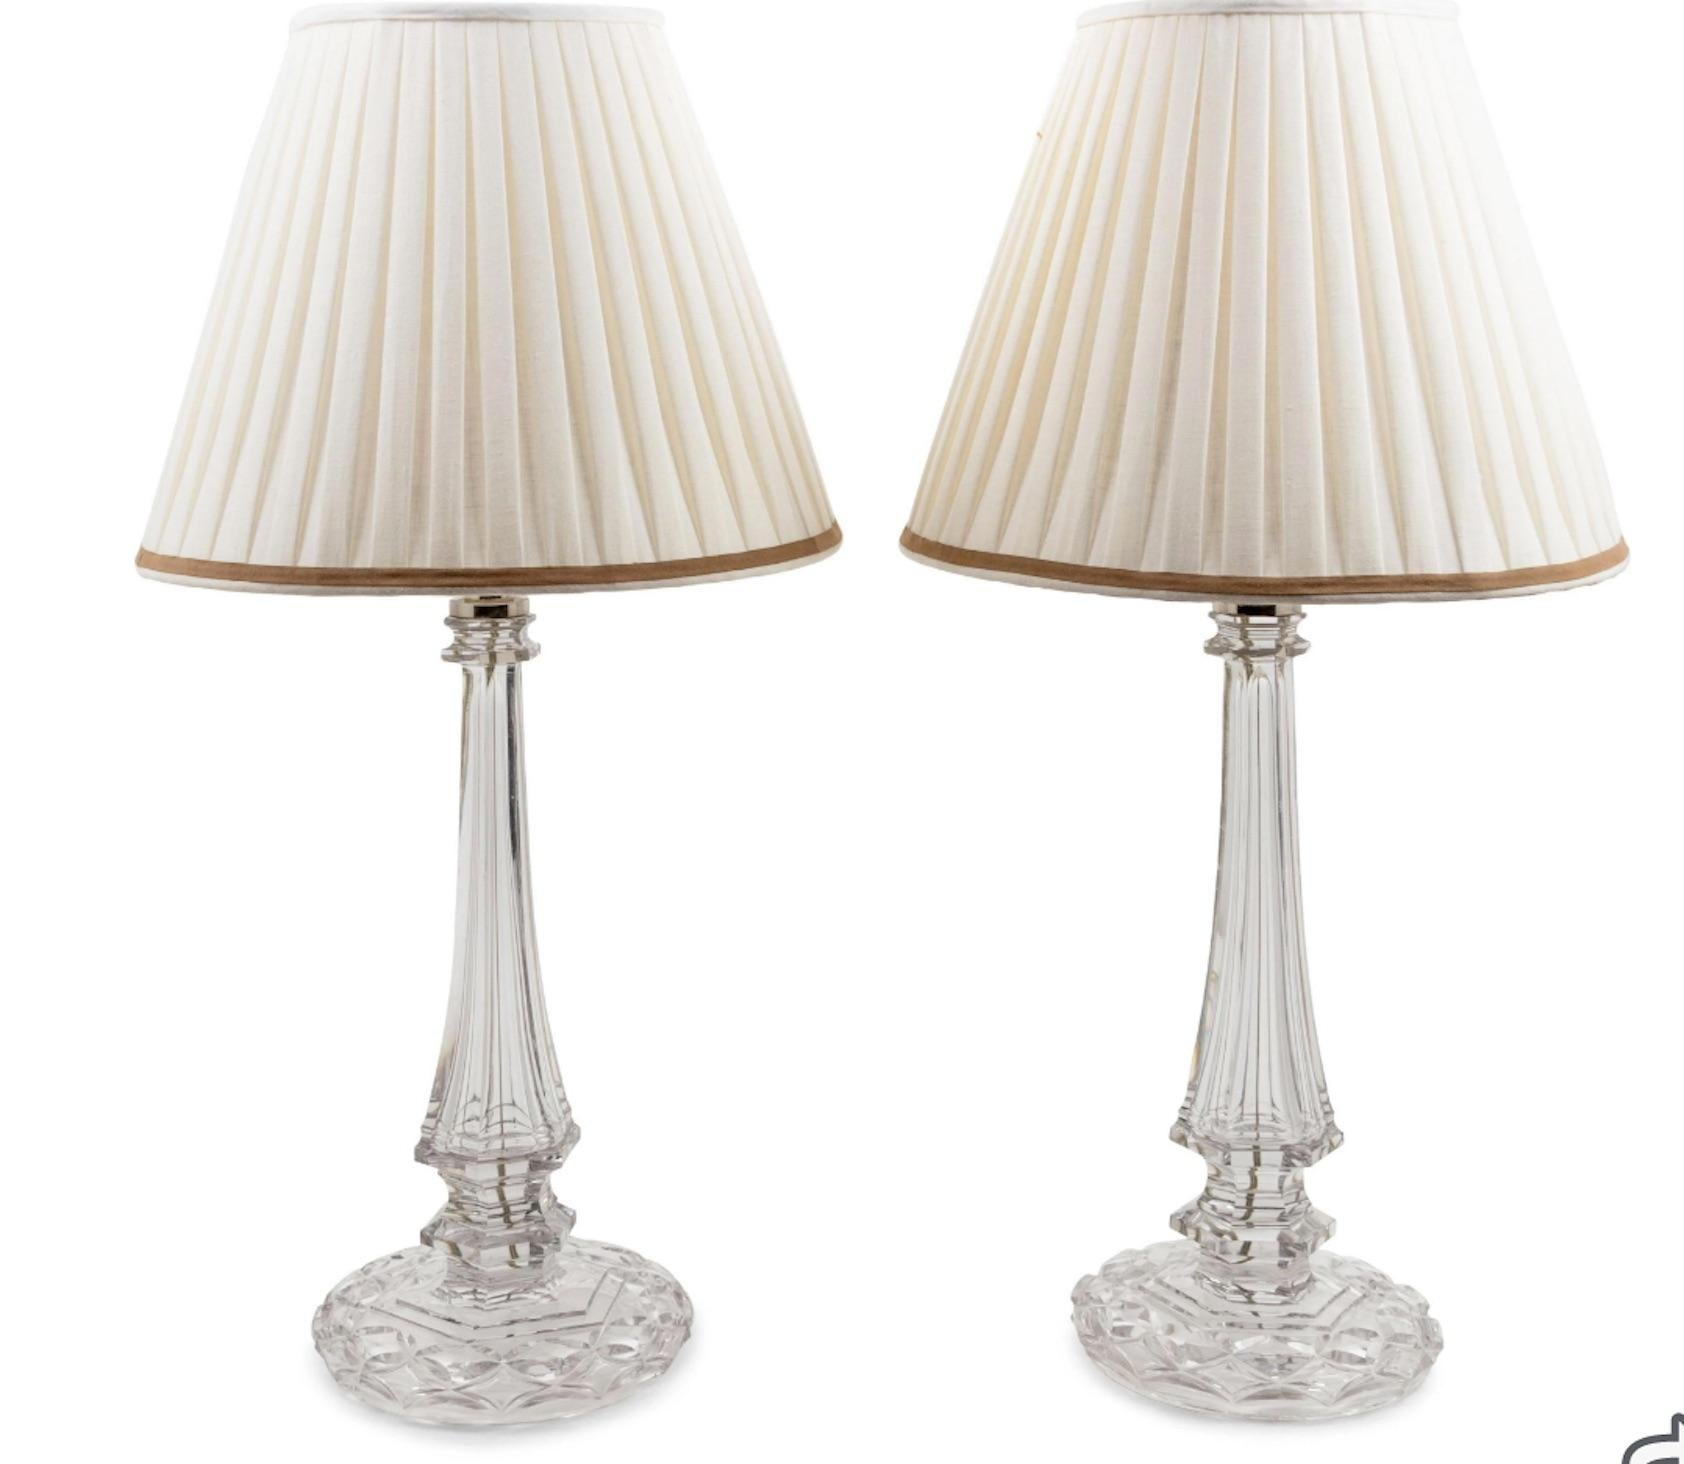 English Pair of Cut Glass Lamps 19th Century, Property of an Important Collection For Sale